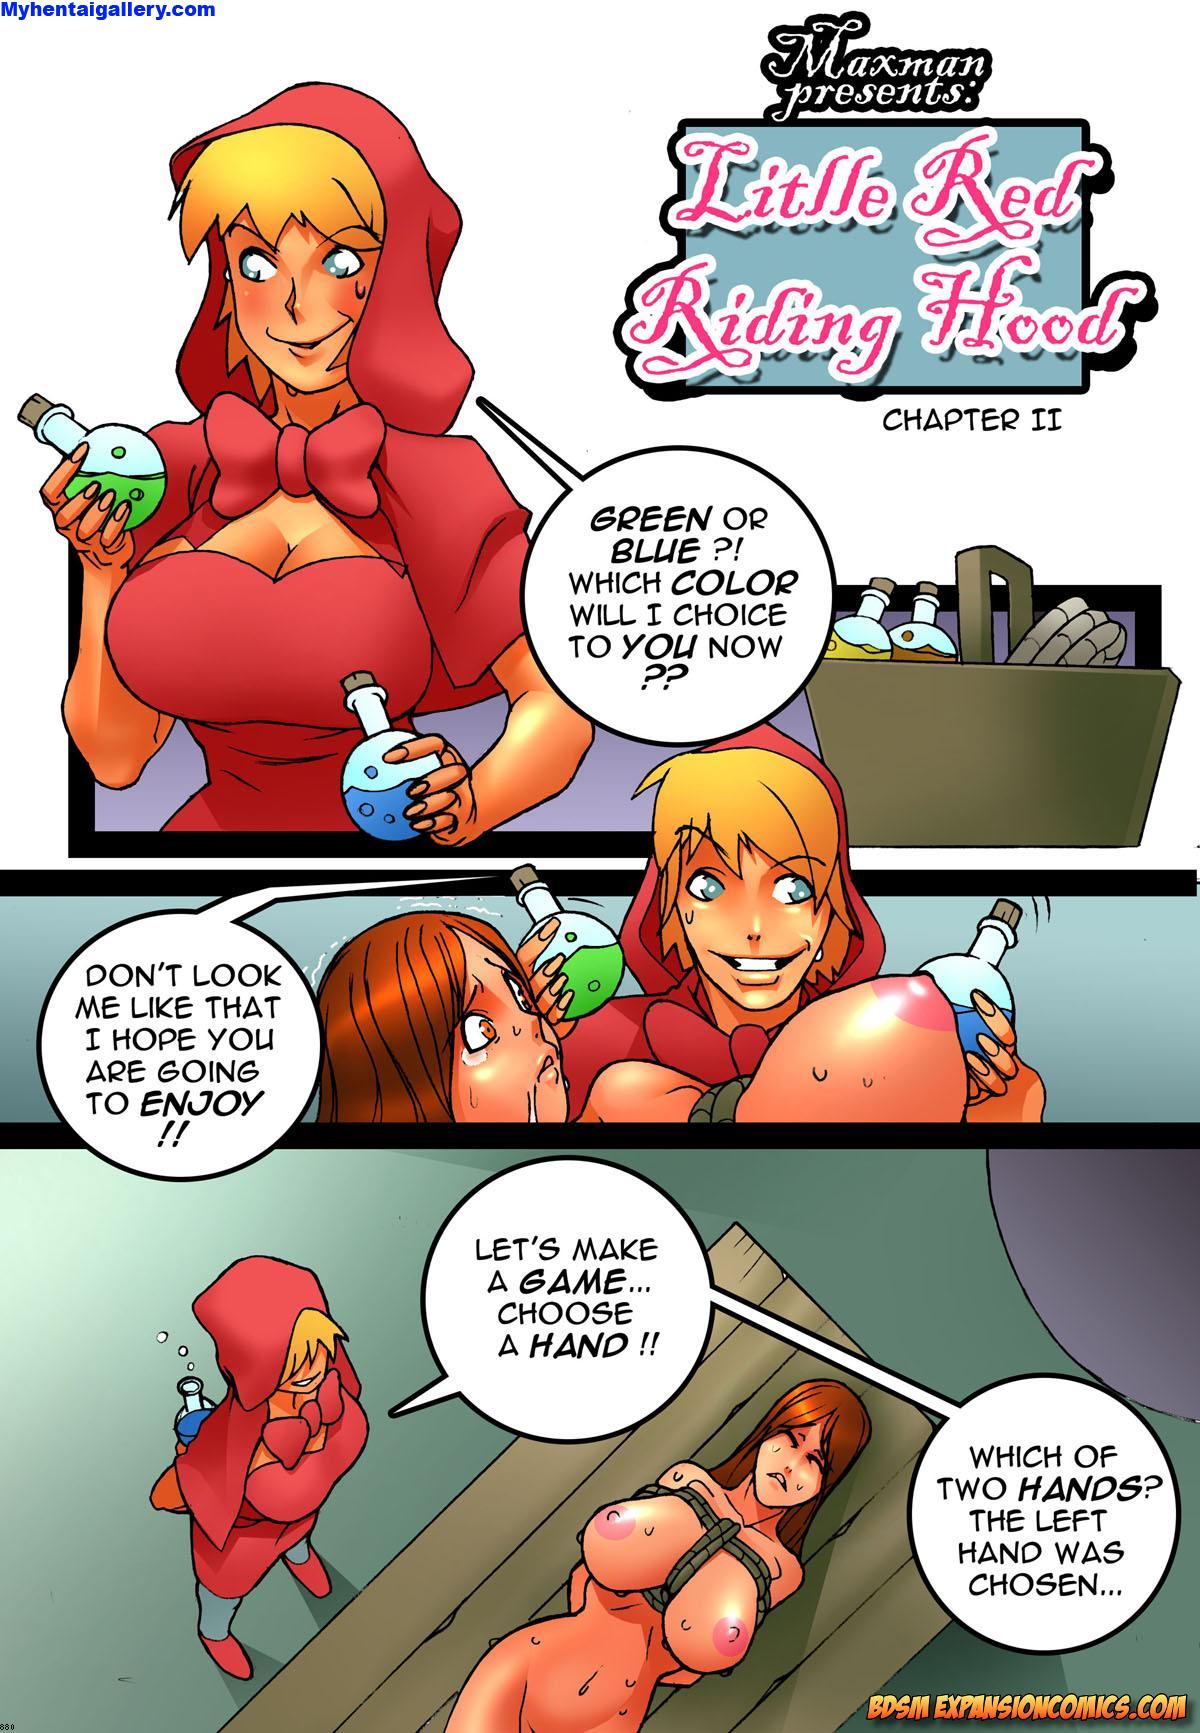 Fairy Tale Cartoon Porn - Untold Fairy Tales - Red Riding Hood 2 - MyHentaiGallery Free Porn Comics  and Sex Cartoons